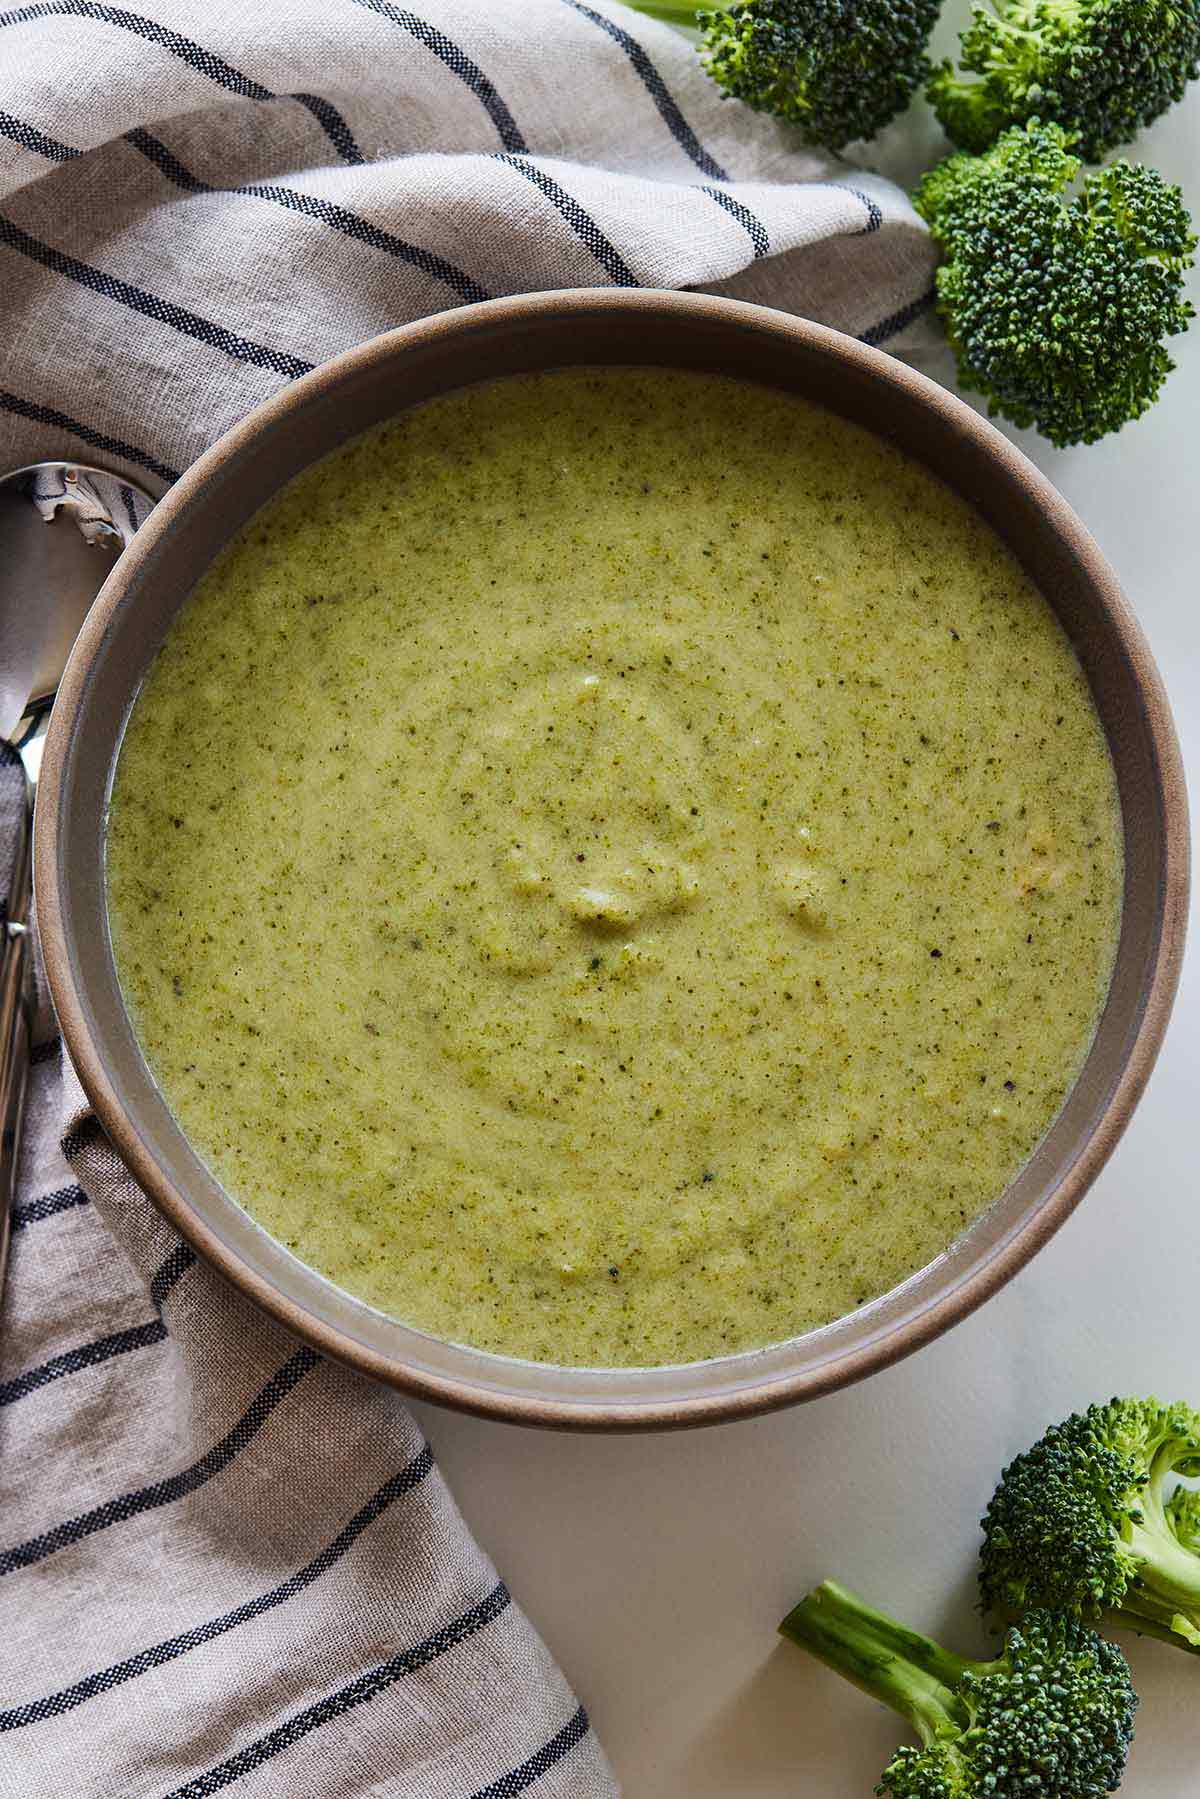 Overhead view of cream of broccoli soup beside a striped linen and broccoli florets.